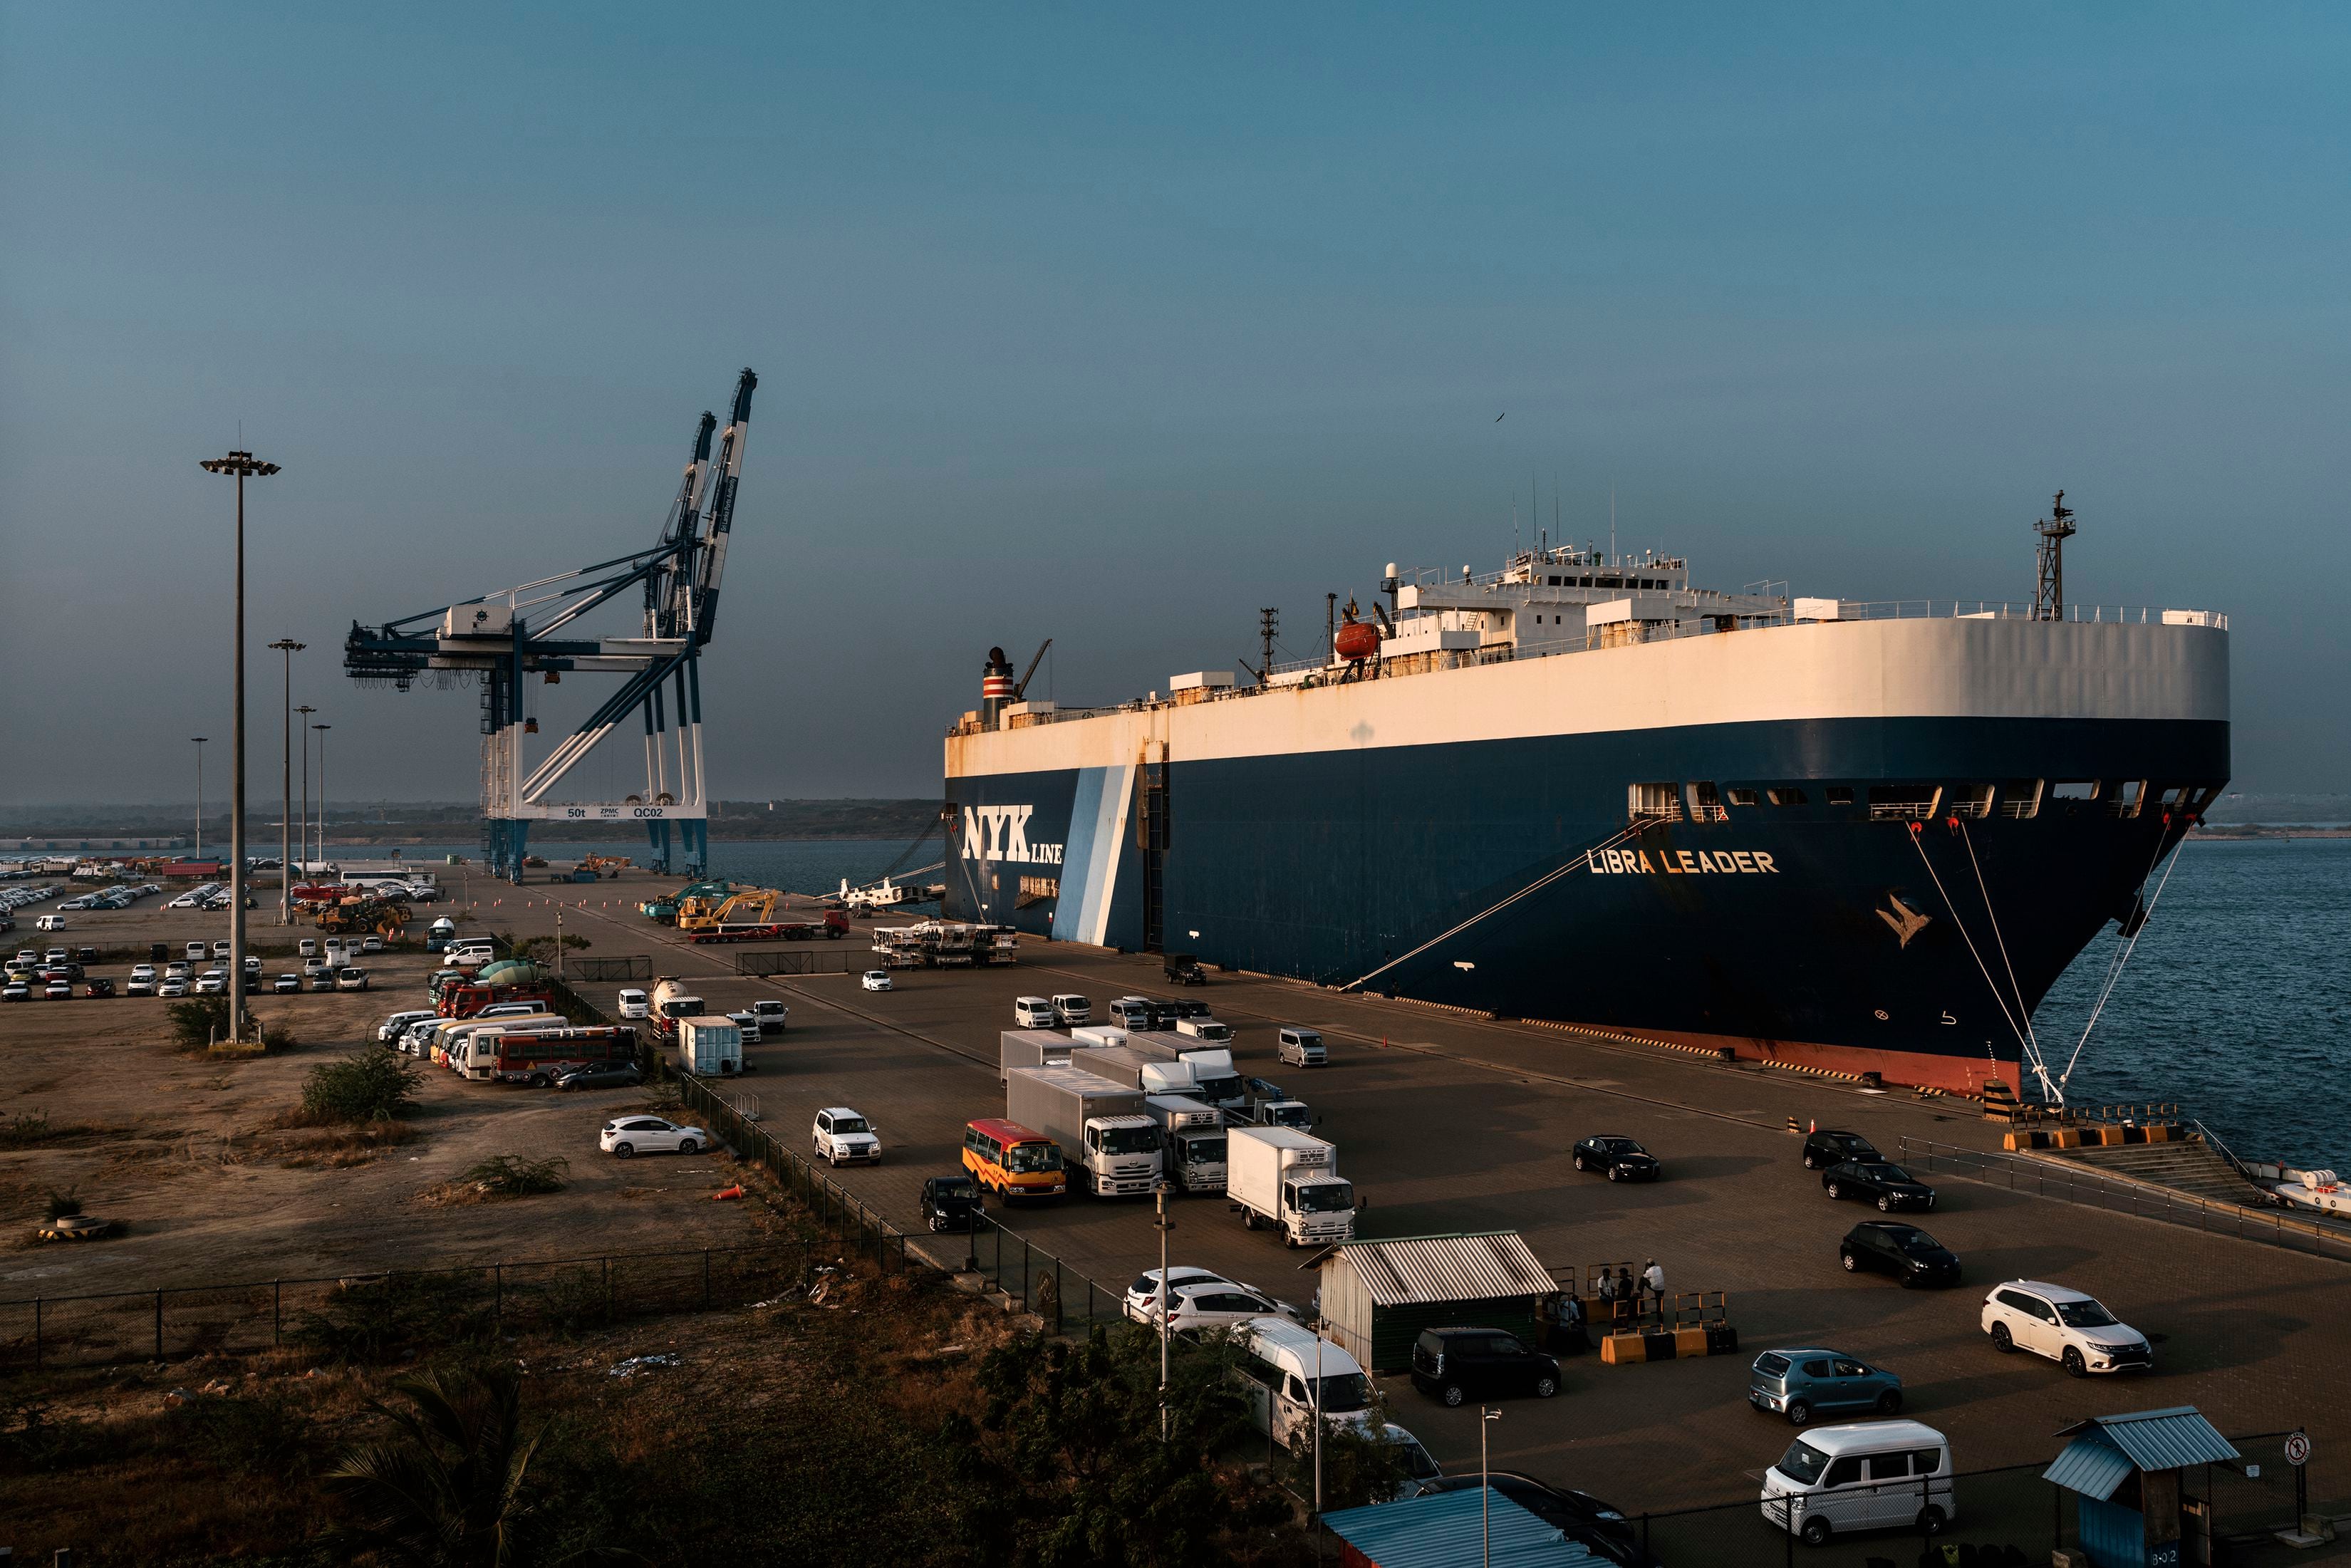 FILE -- The Hambantota Port, which the Sri Lankan government handed over to China when it couldn’t repay its debt, in Hambantota, Sri Lanka, March 5, 2018. (Adam Dean/The New York Times)